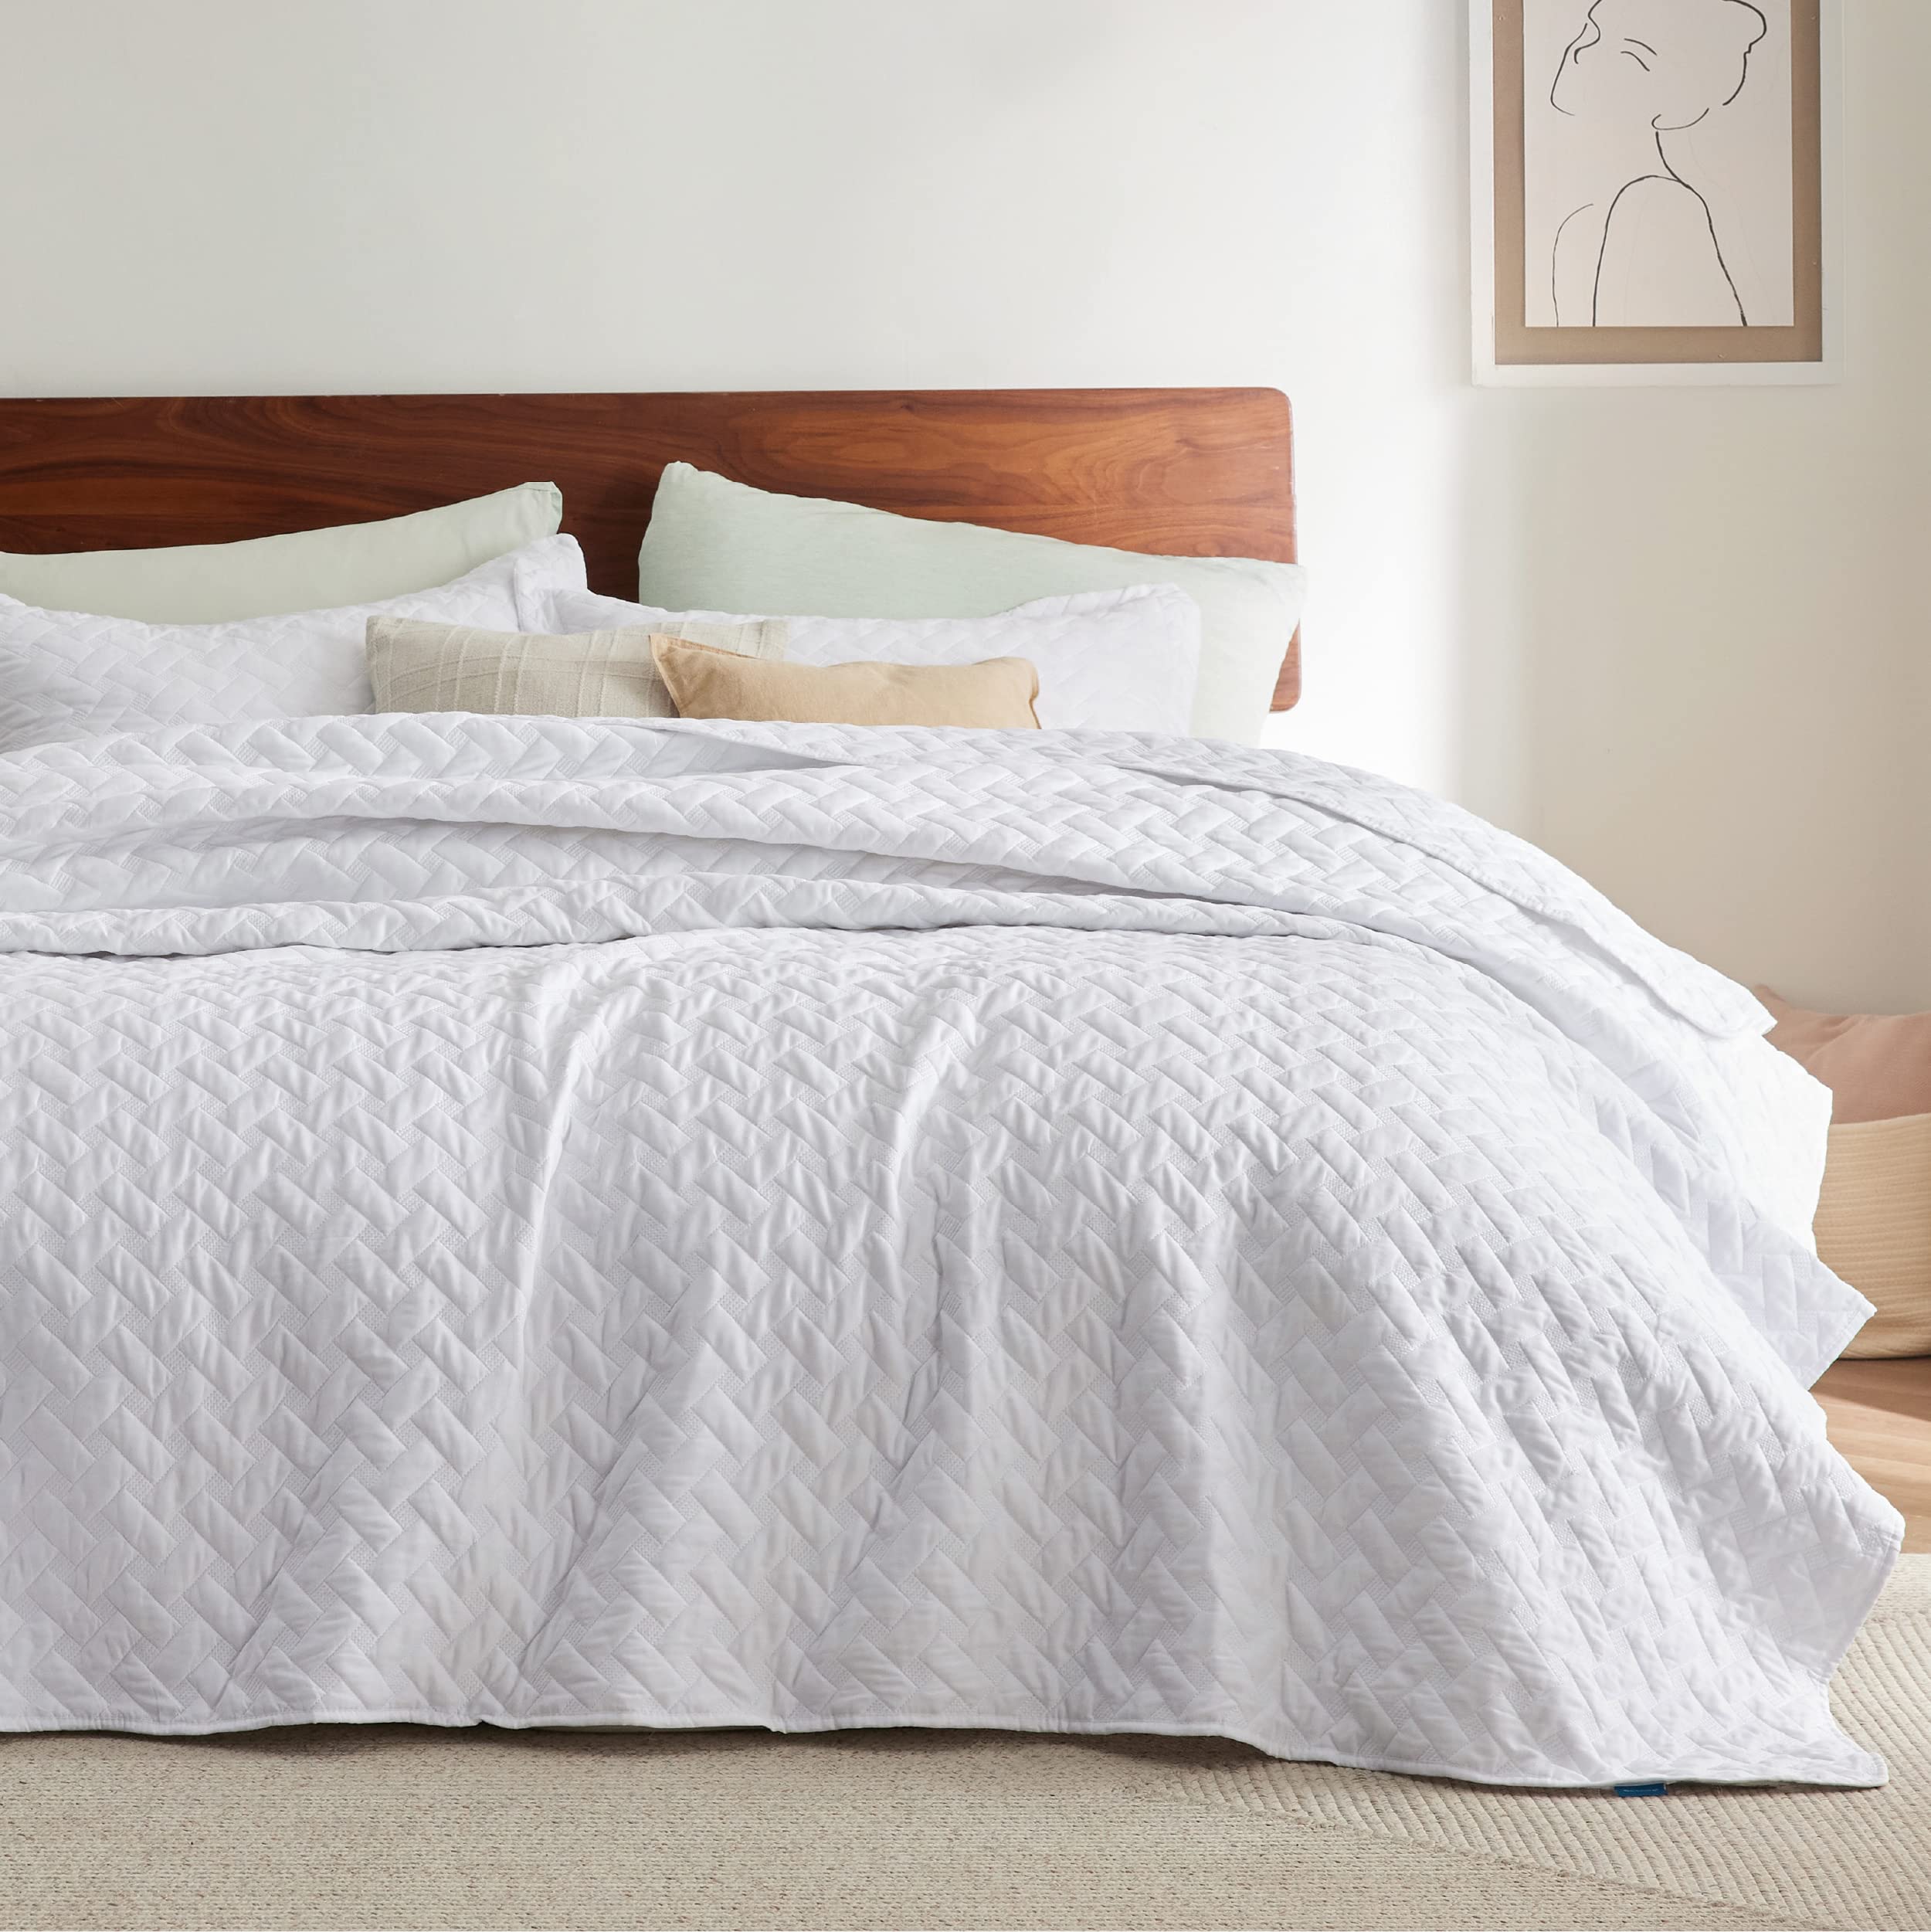 queen size white bedspread